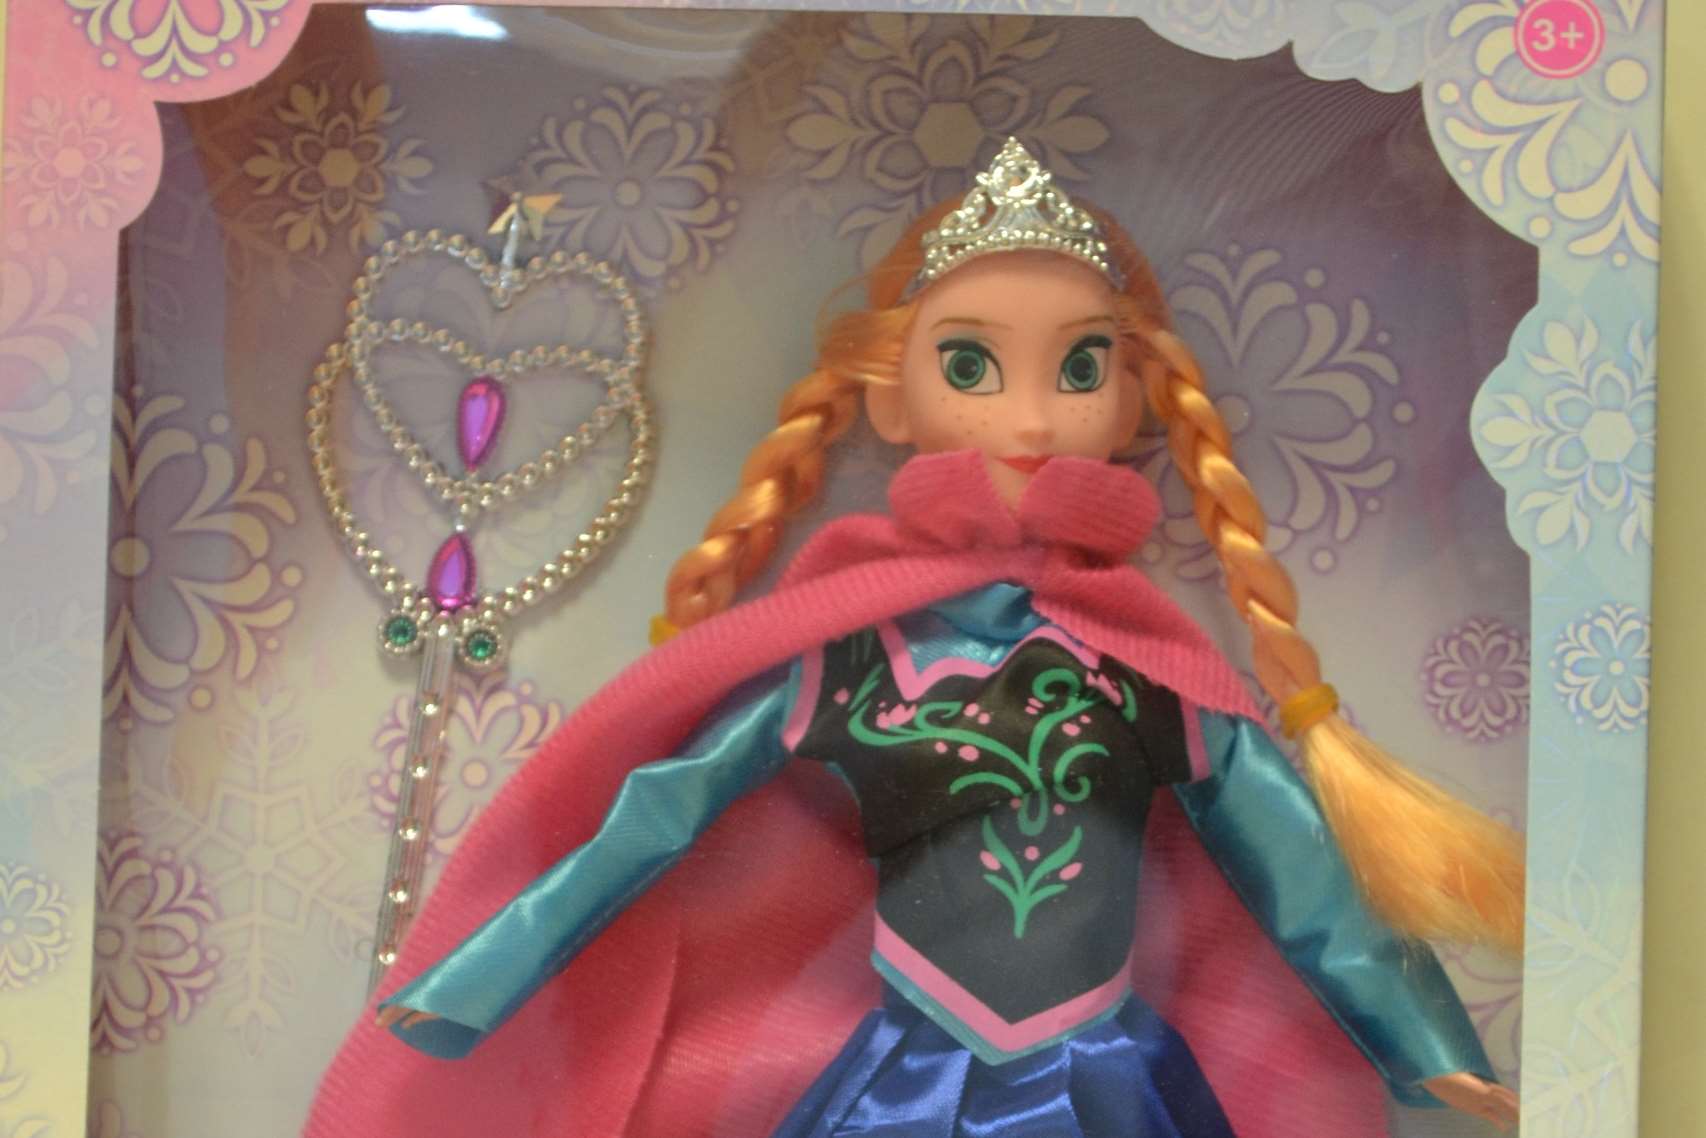 This Princess Anna toy was among the Frozen toys seized in the Chinese consignment